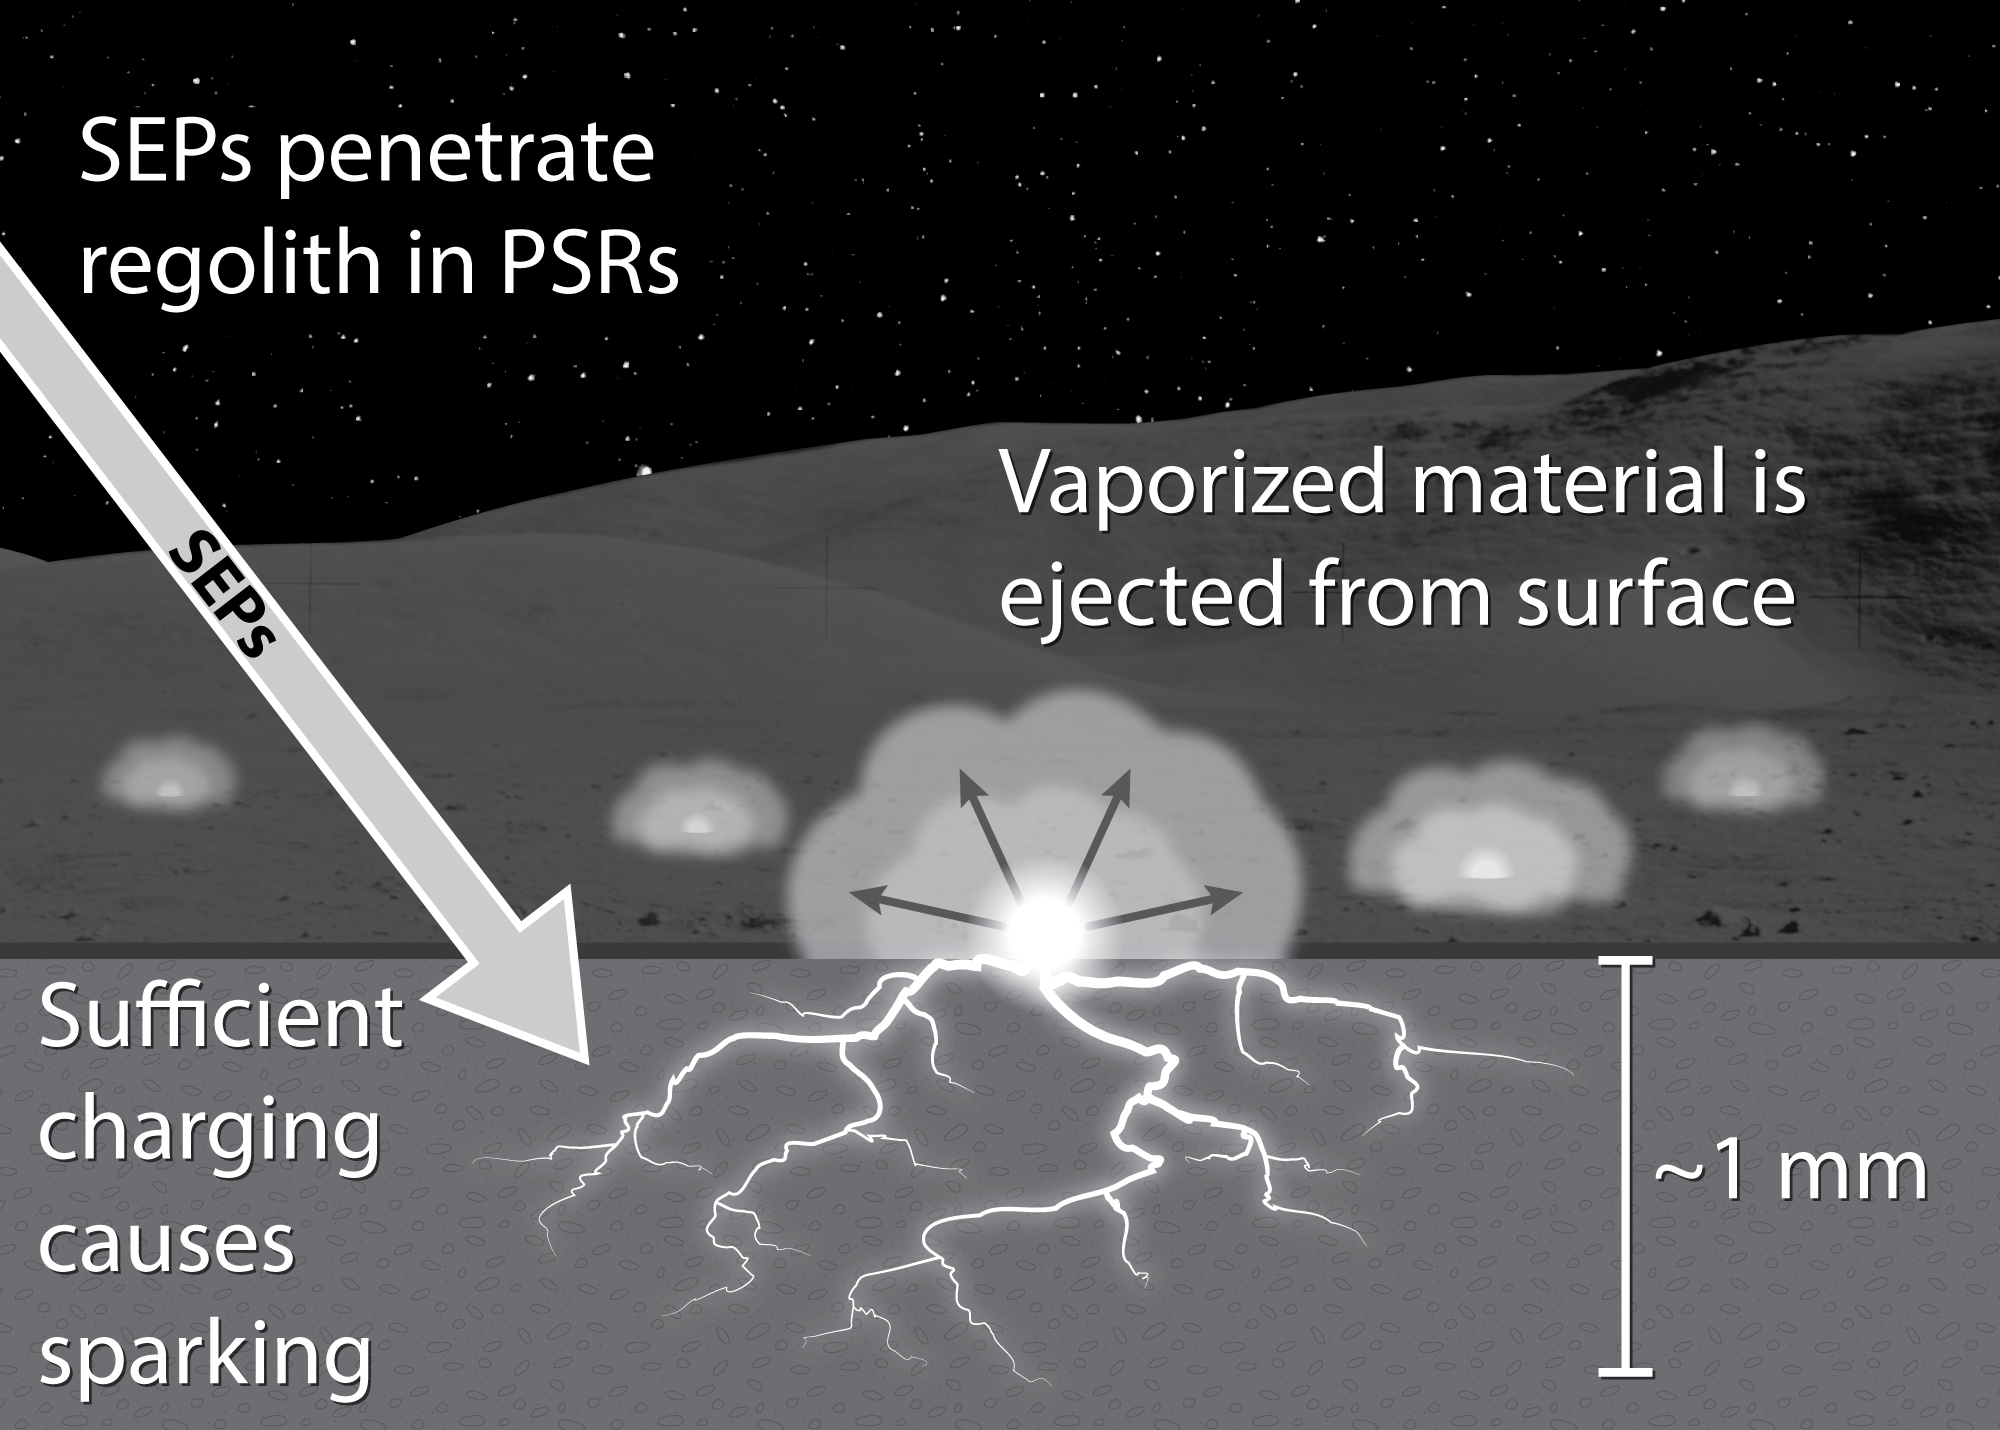 Illustration showing how solar storms charge lunar soil